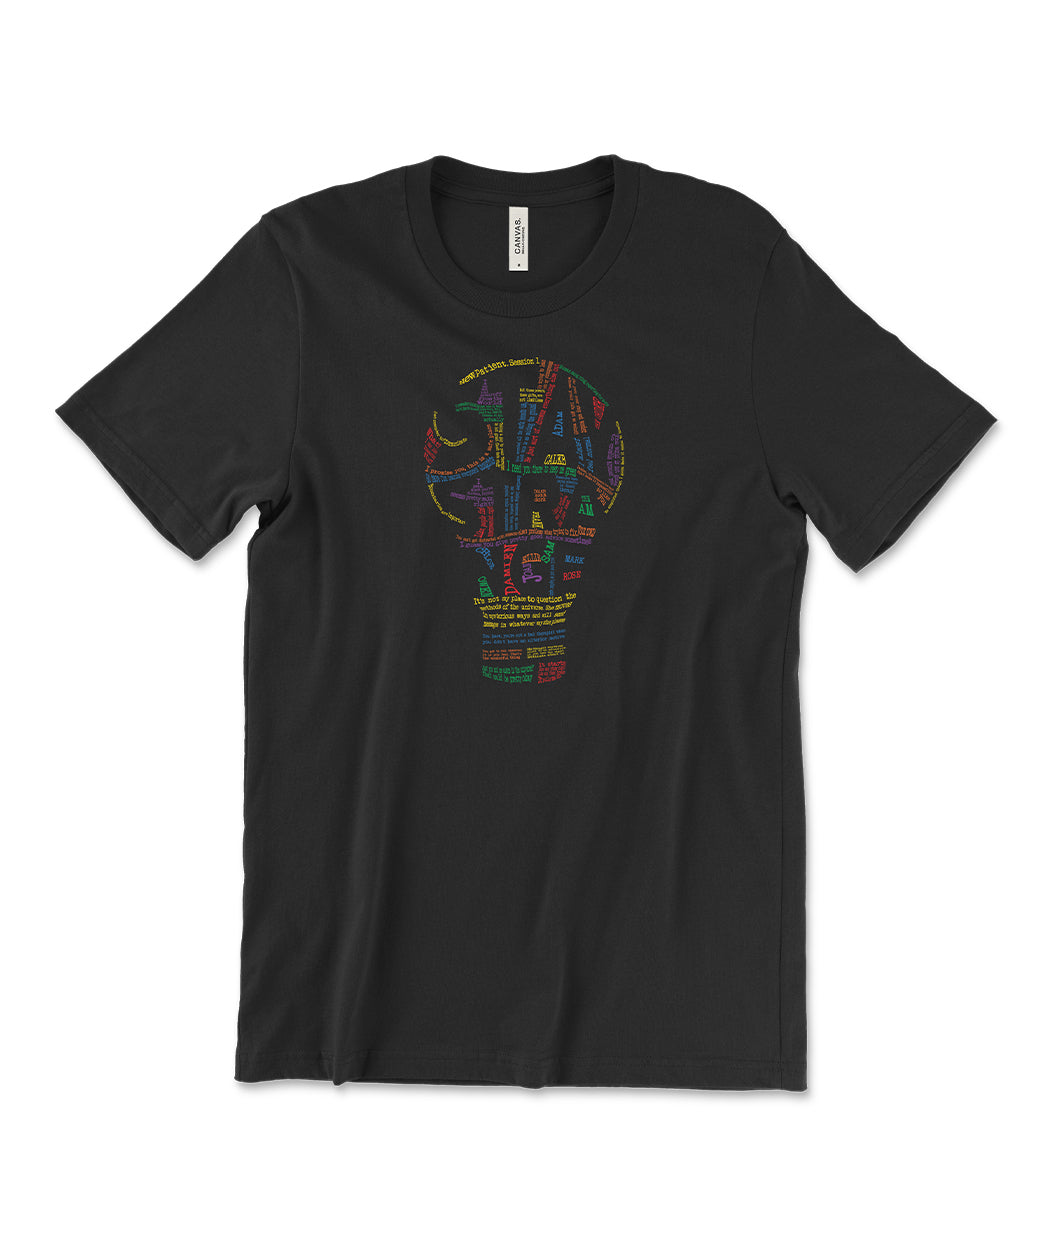 A black t-shirt with a lightbulb in the center made up of small, rainbow colored text with negative space that reads "Stay Strange". From Atypical Artists.